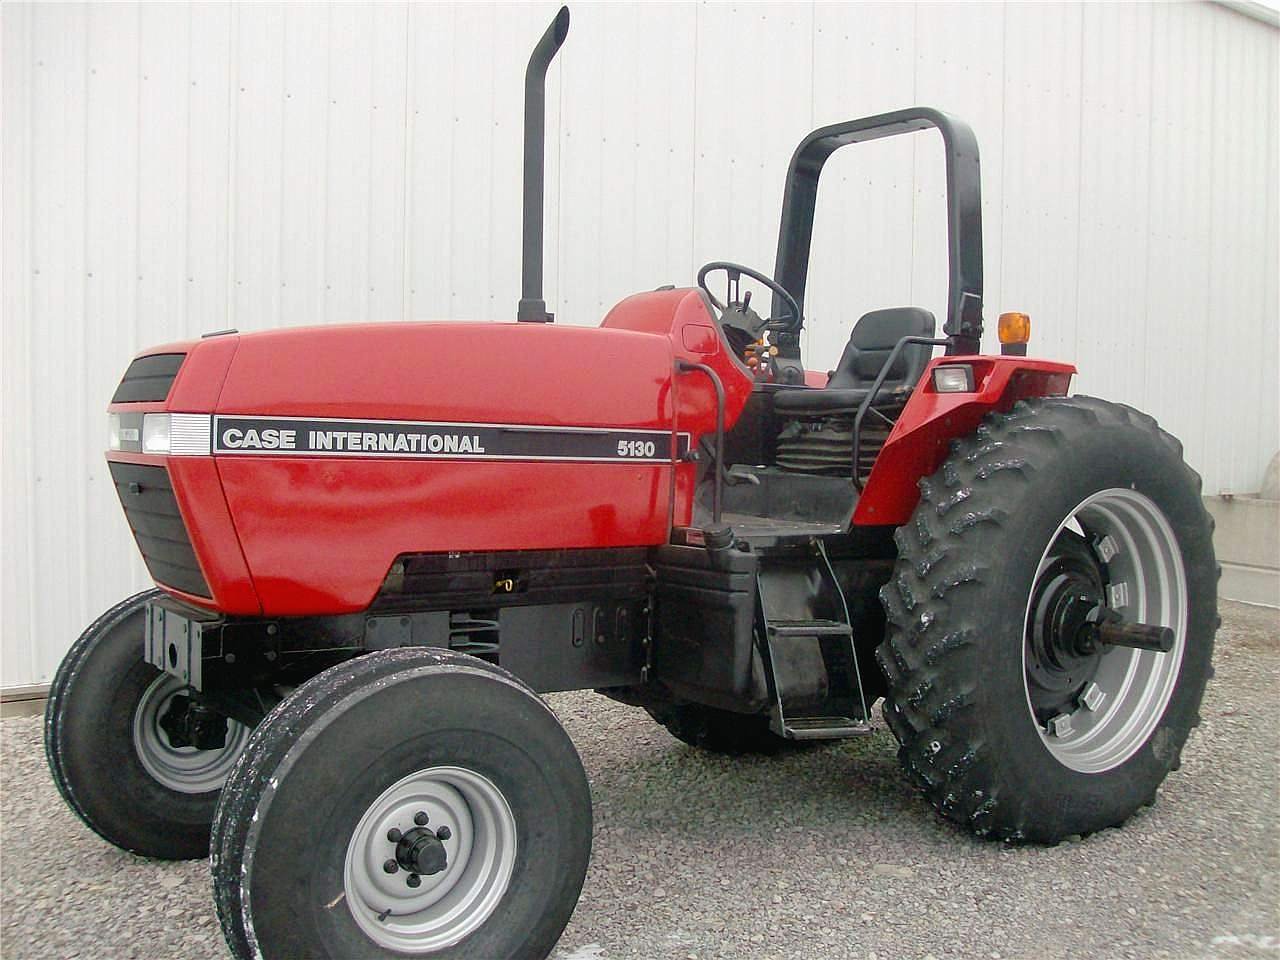 1990 Case Ih 5130 - Buy Tractor Product on Alibaba.com